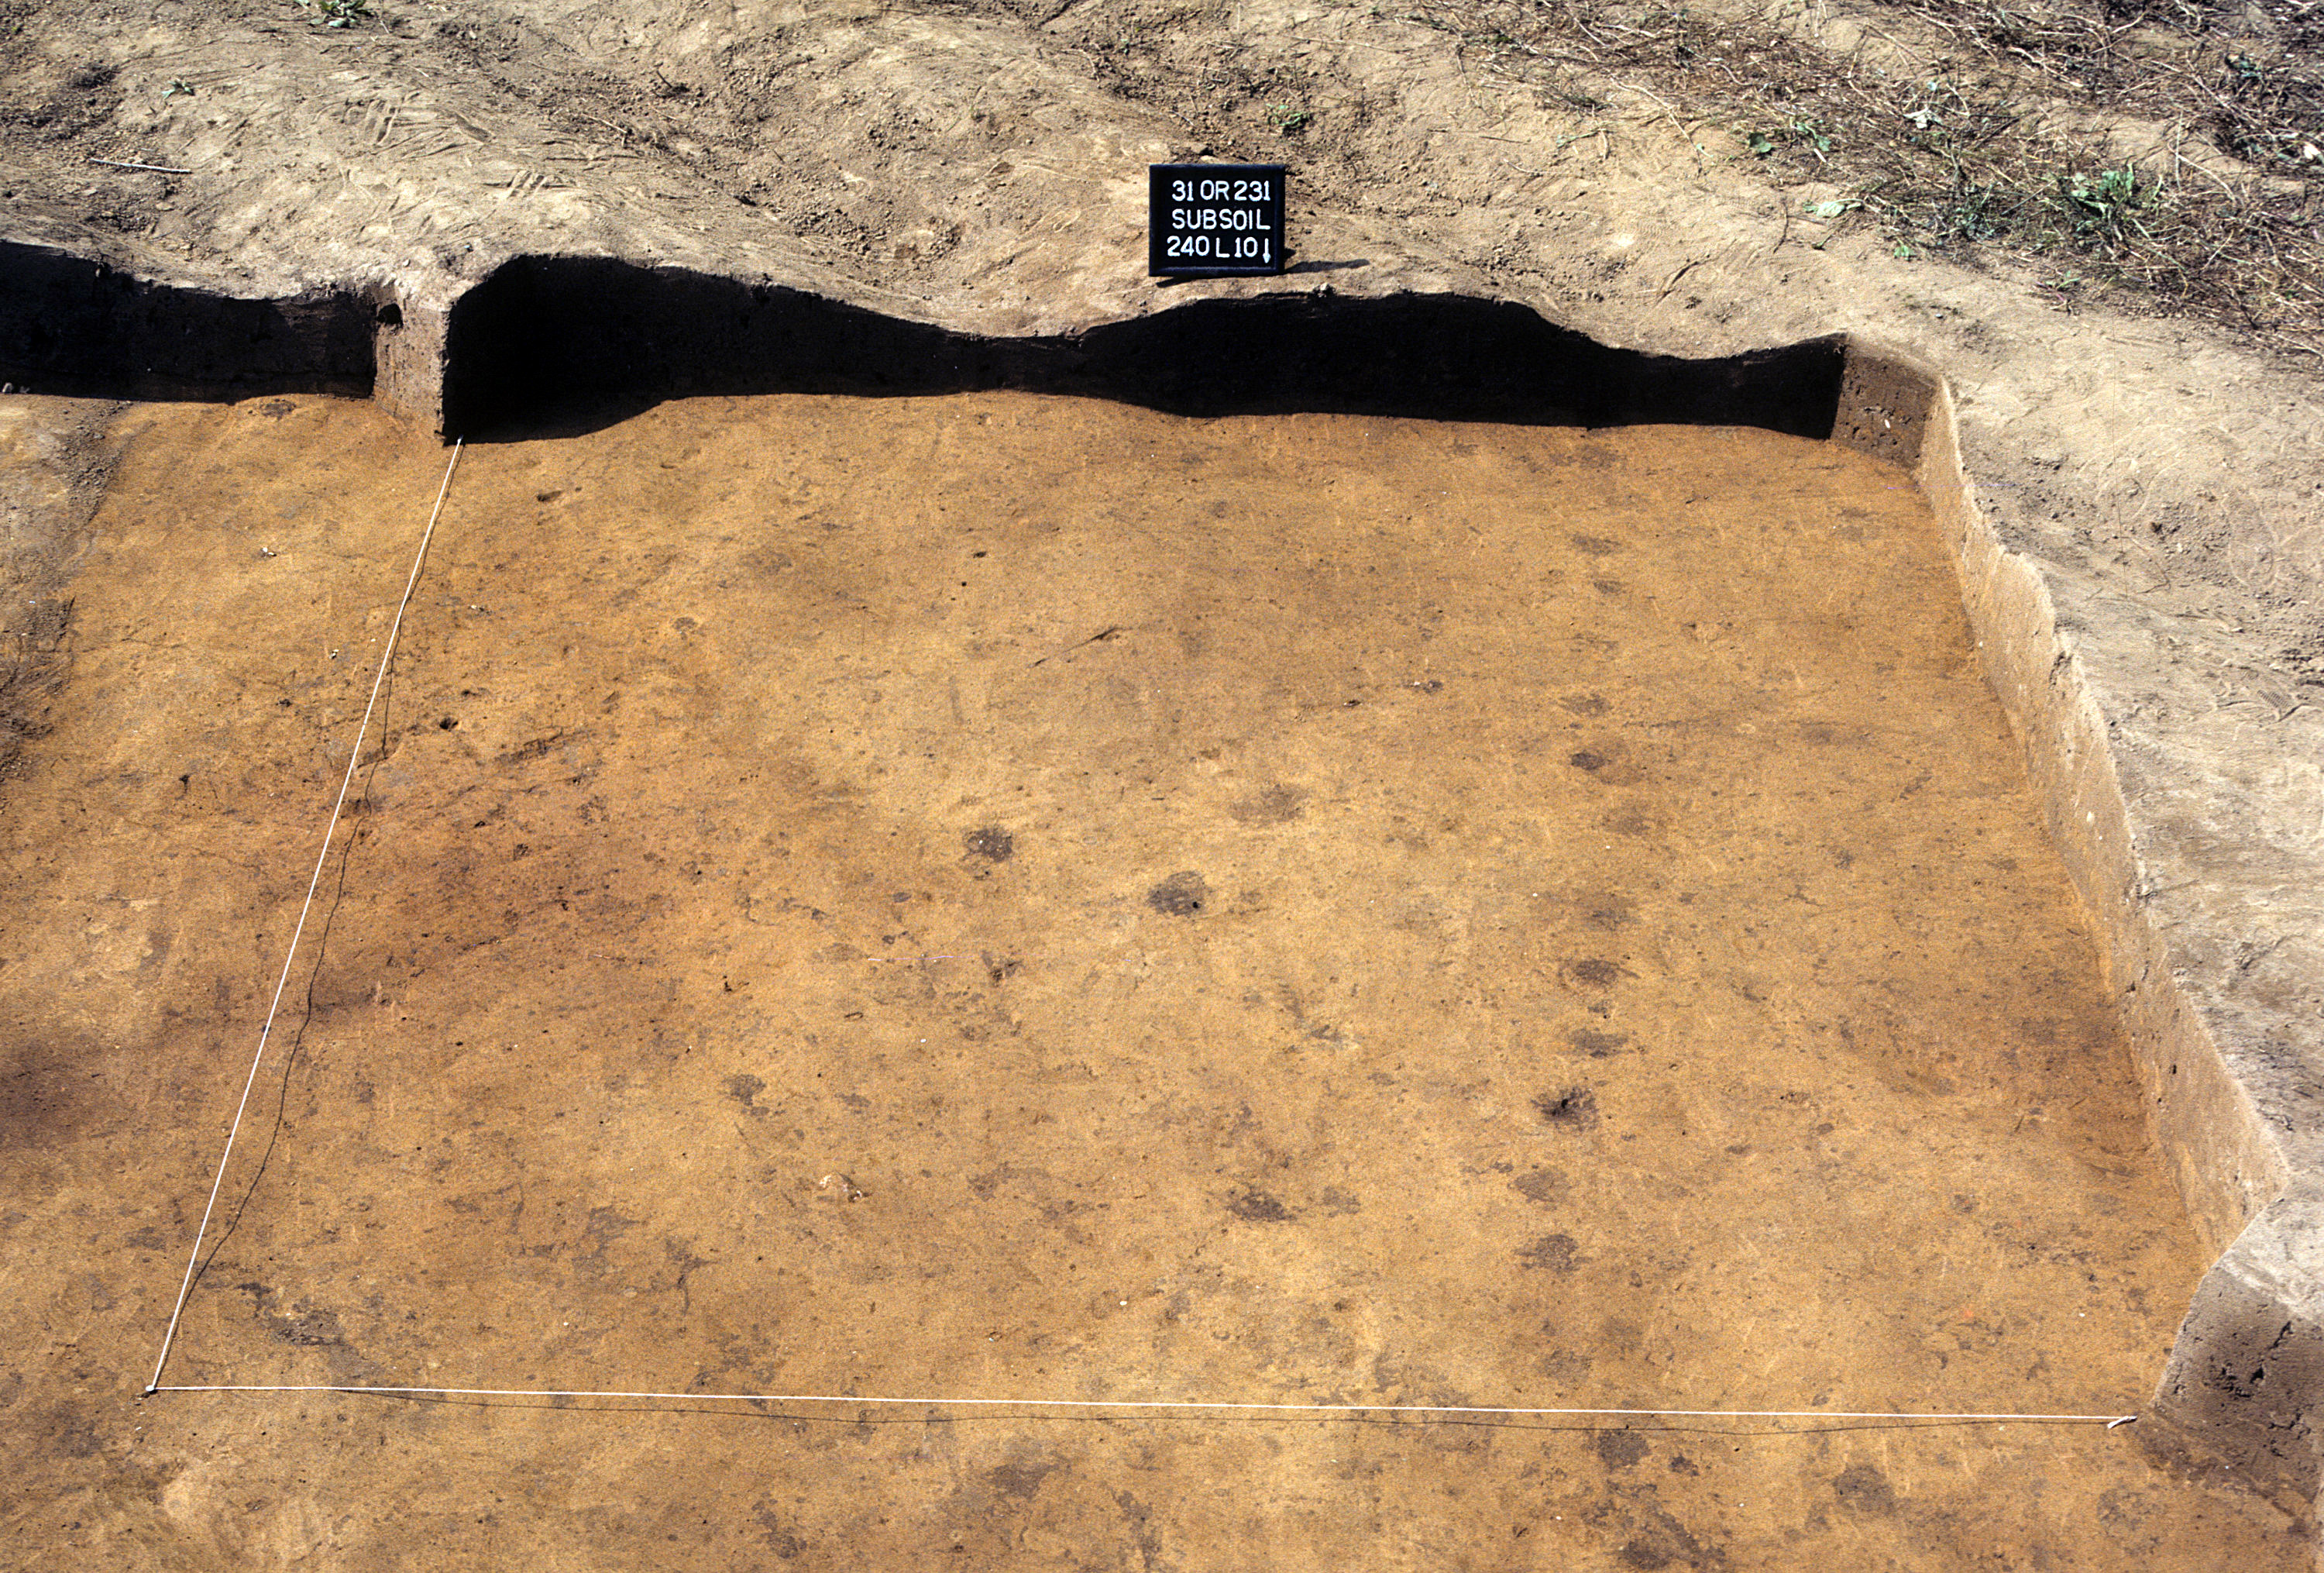 Figure 841. Sq. 240L10 at top of subsoil (view to south).